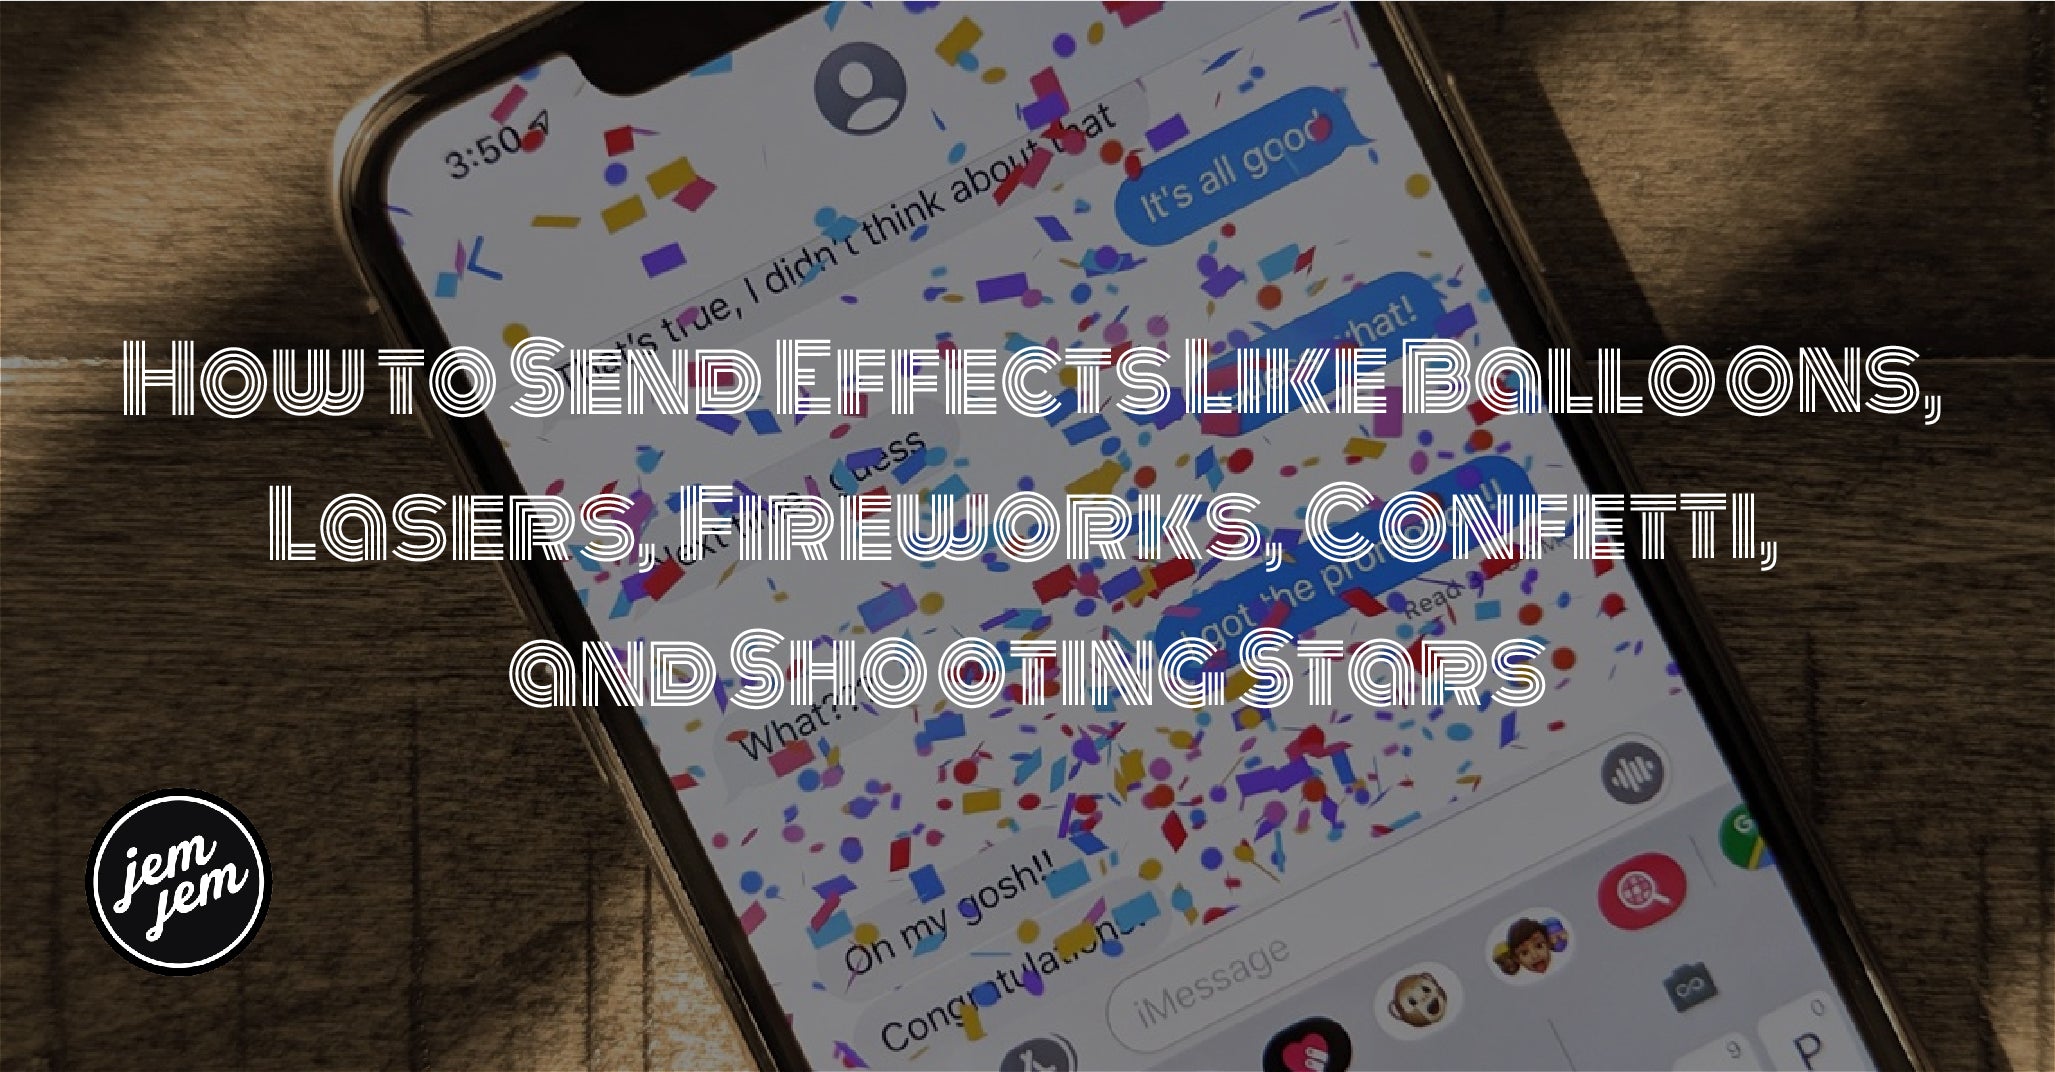 How to Send Effects Like Balloons, Lasers,  Fireworks, Confetti, and Shooting Stars